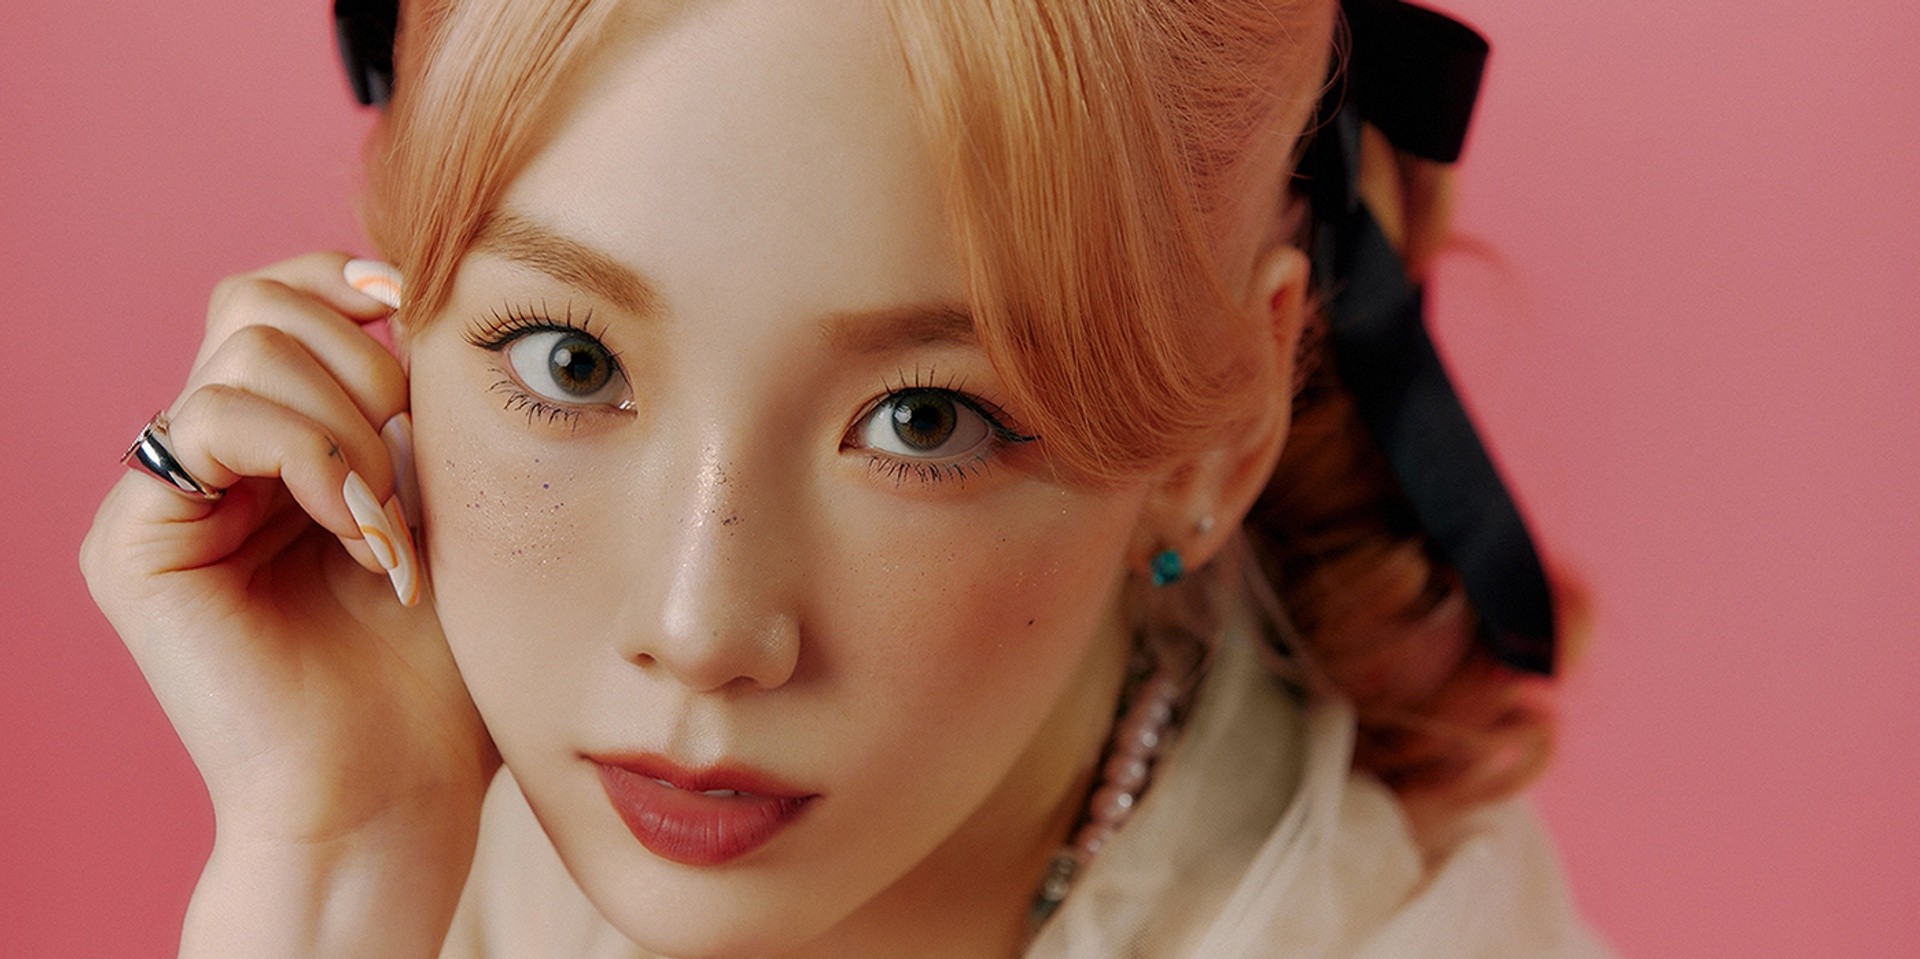 Girls' Generation's Taeyeon welcomes the 'Weekend' in new single — listen